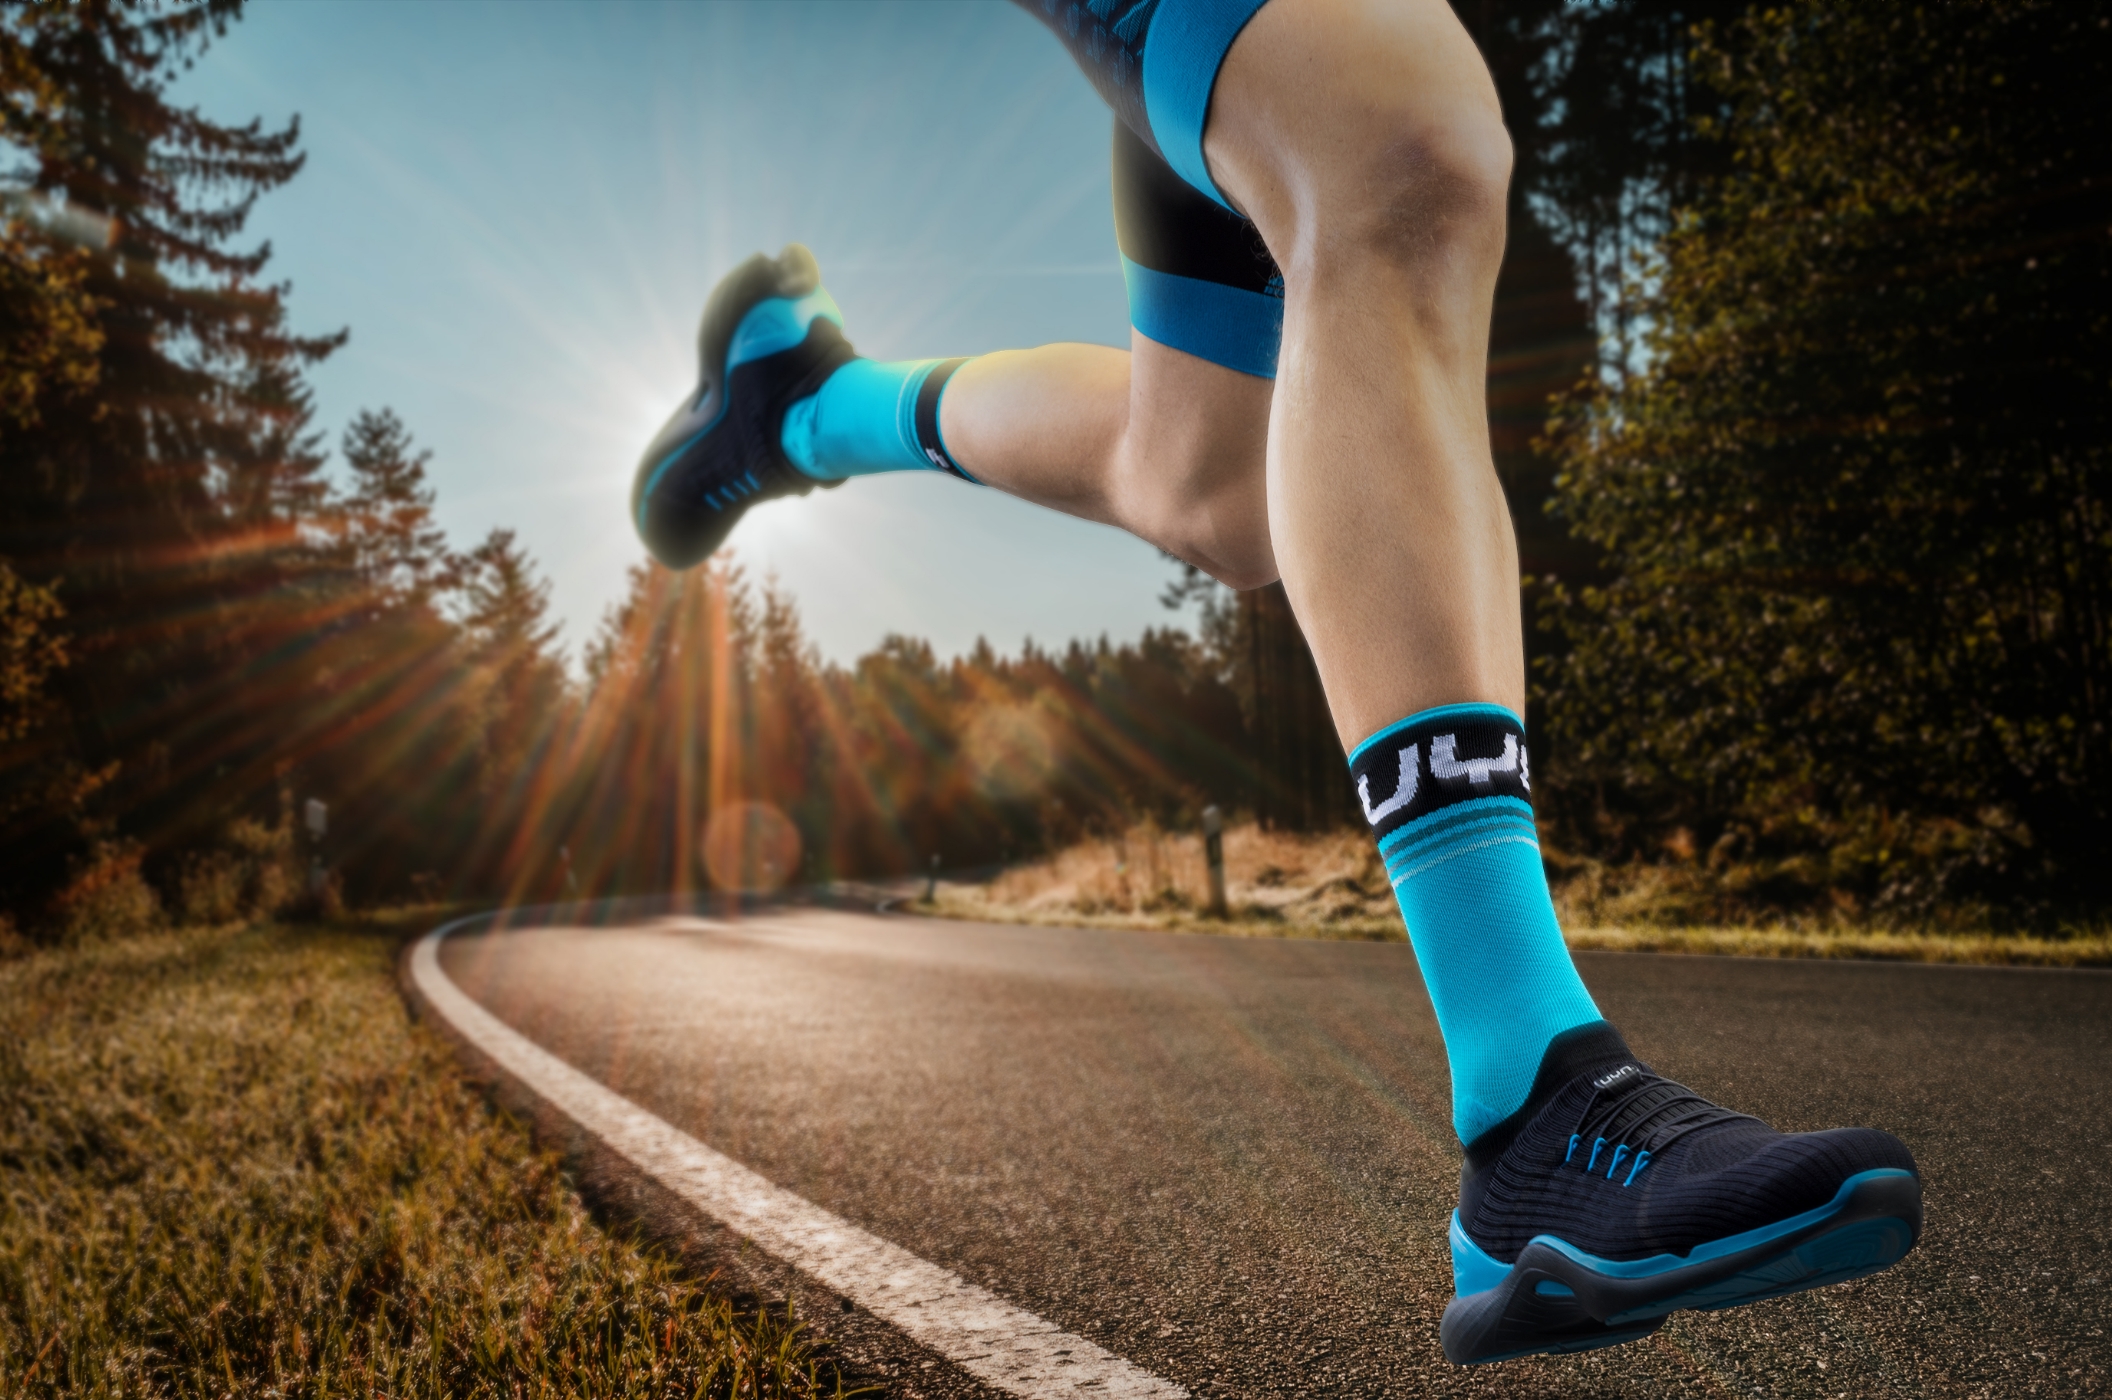 Running shoes and socks with high breathability and flexibility